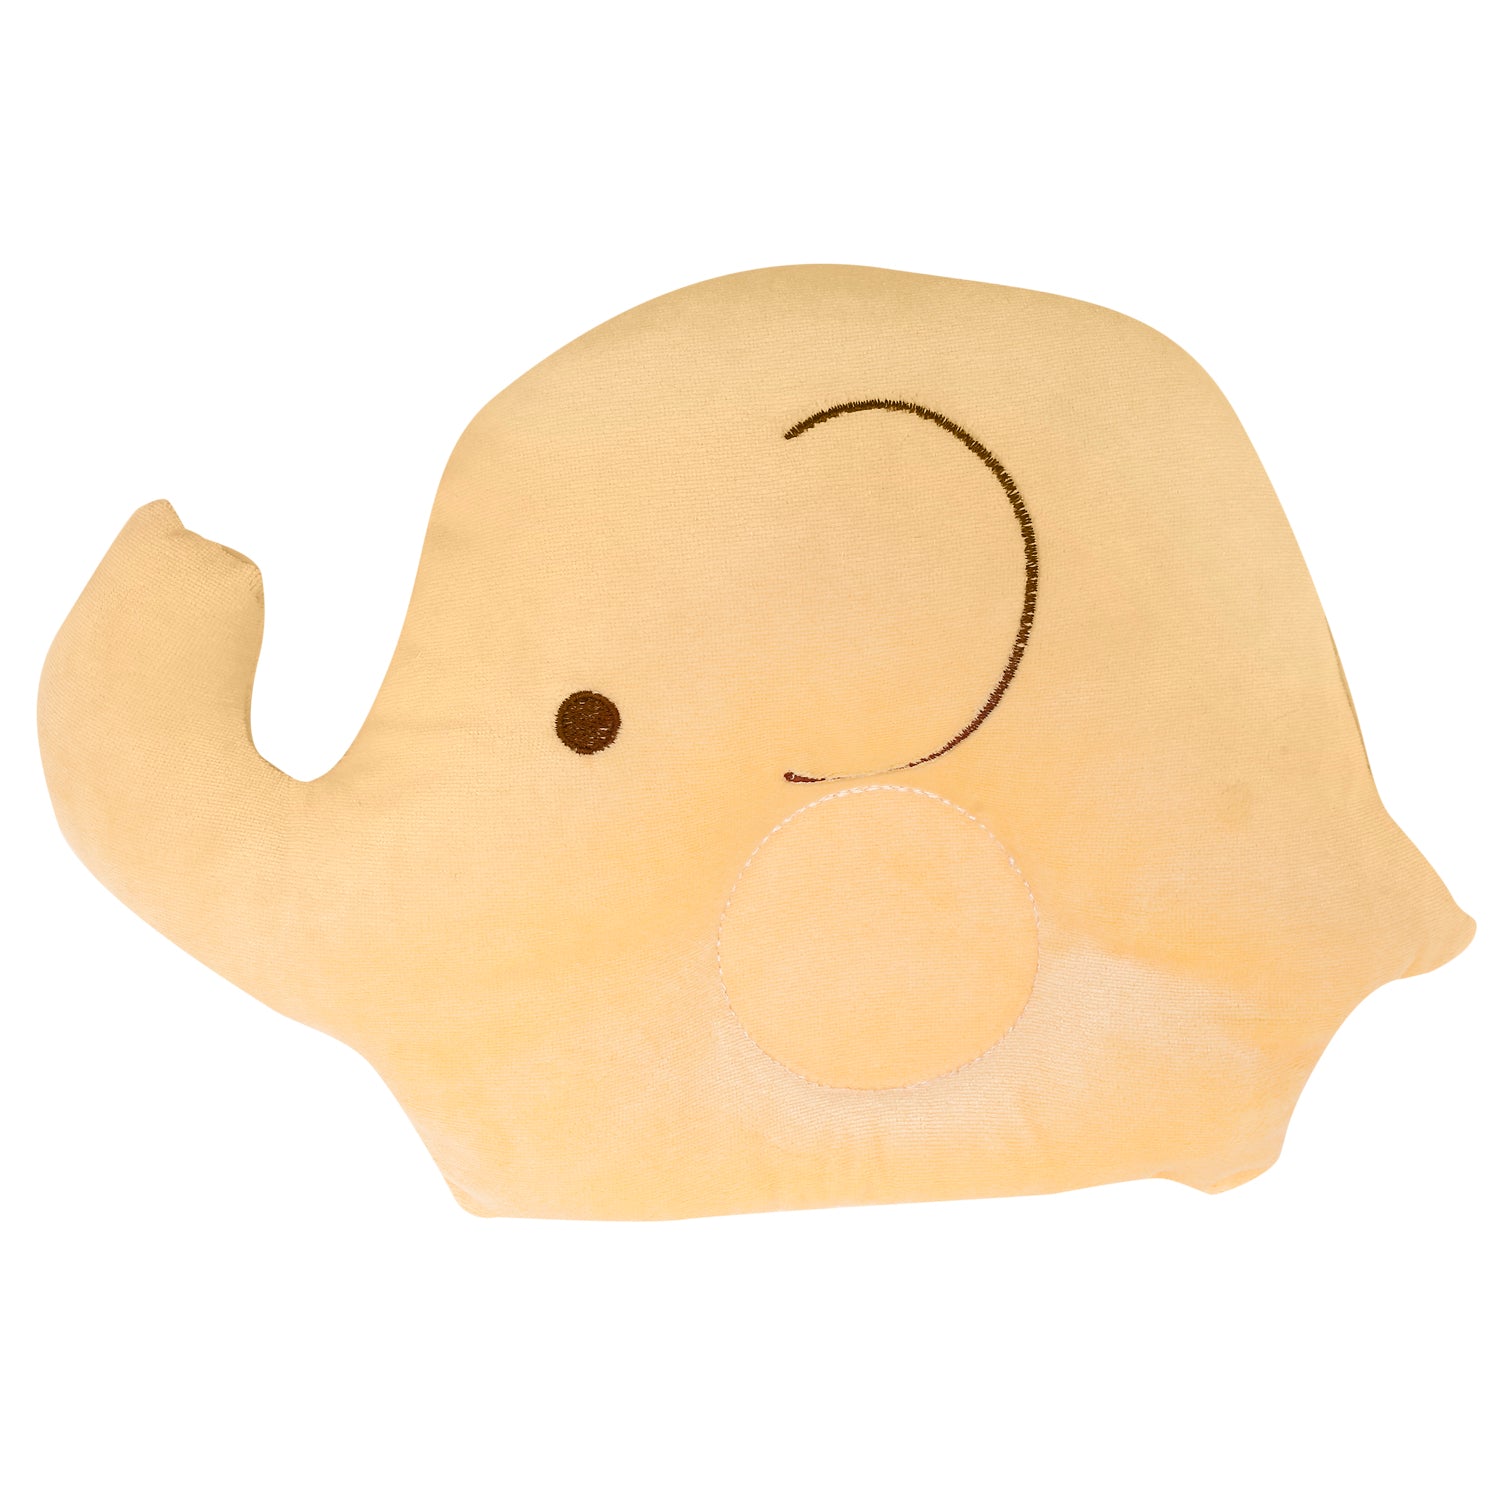 Elephant Shaped Yellow Baby Pillow